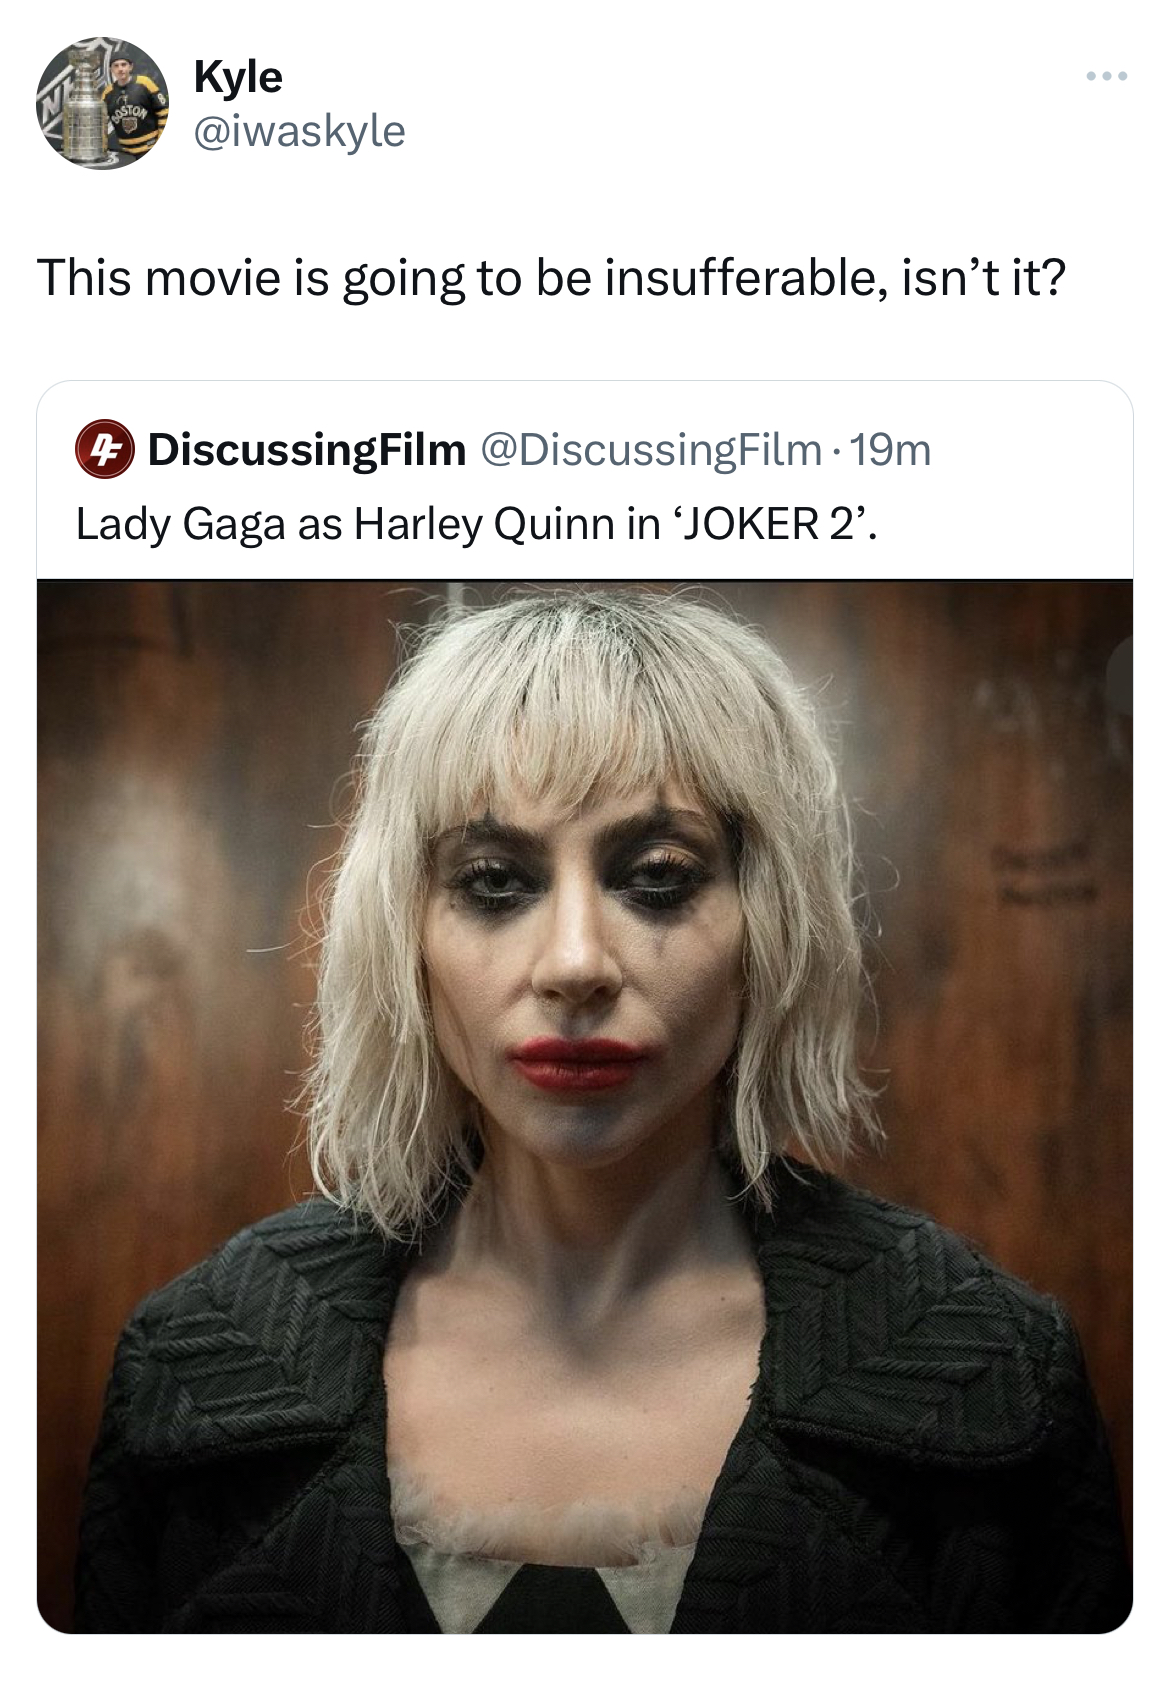 savage tweets photo caption - Kyle This movie is going to be insufferable, isn't it? Discussing Film Lady Gaga as Harley Quinn in 'Joker 2.